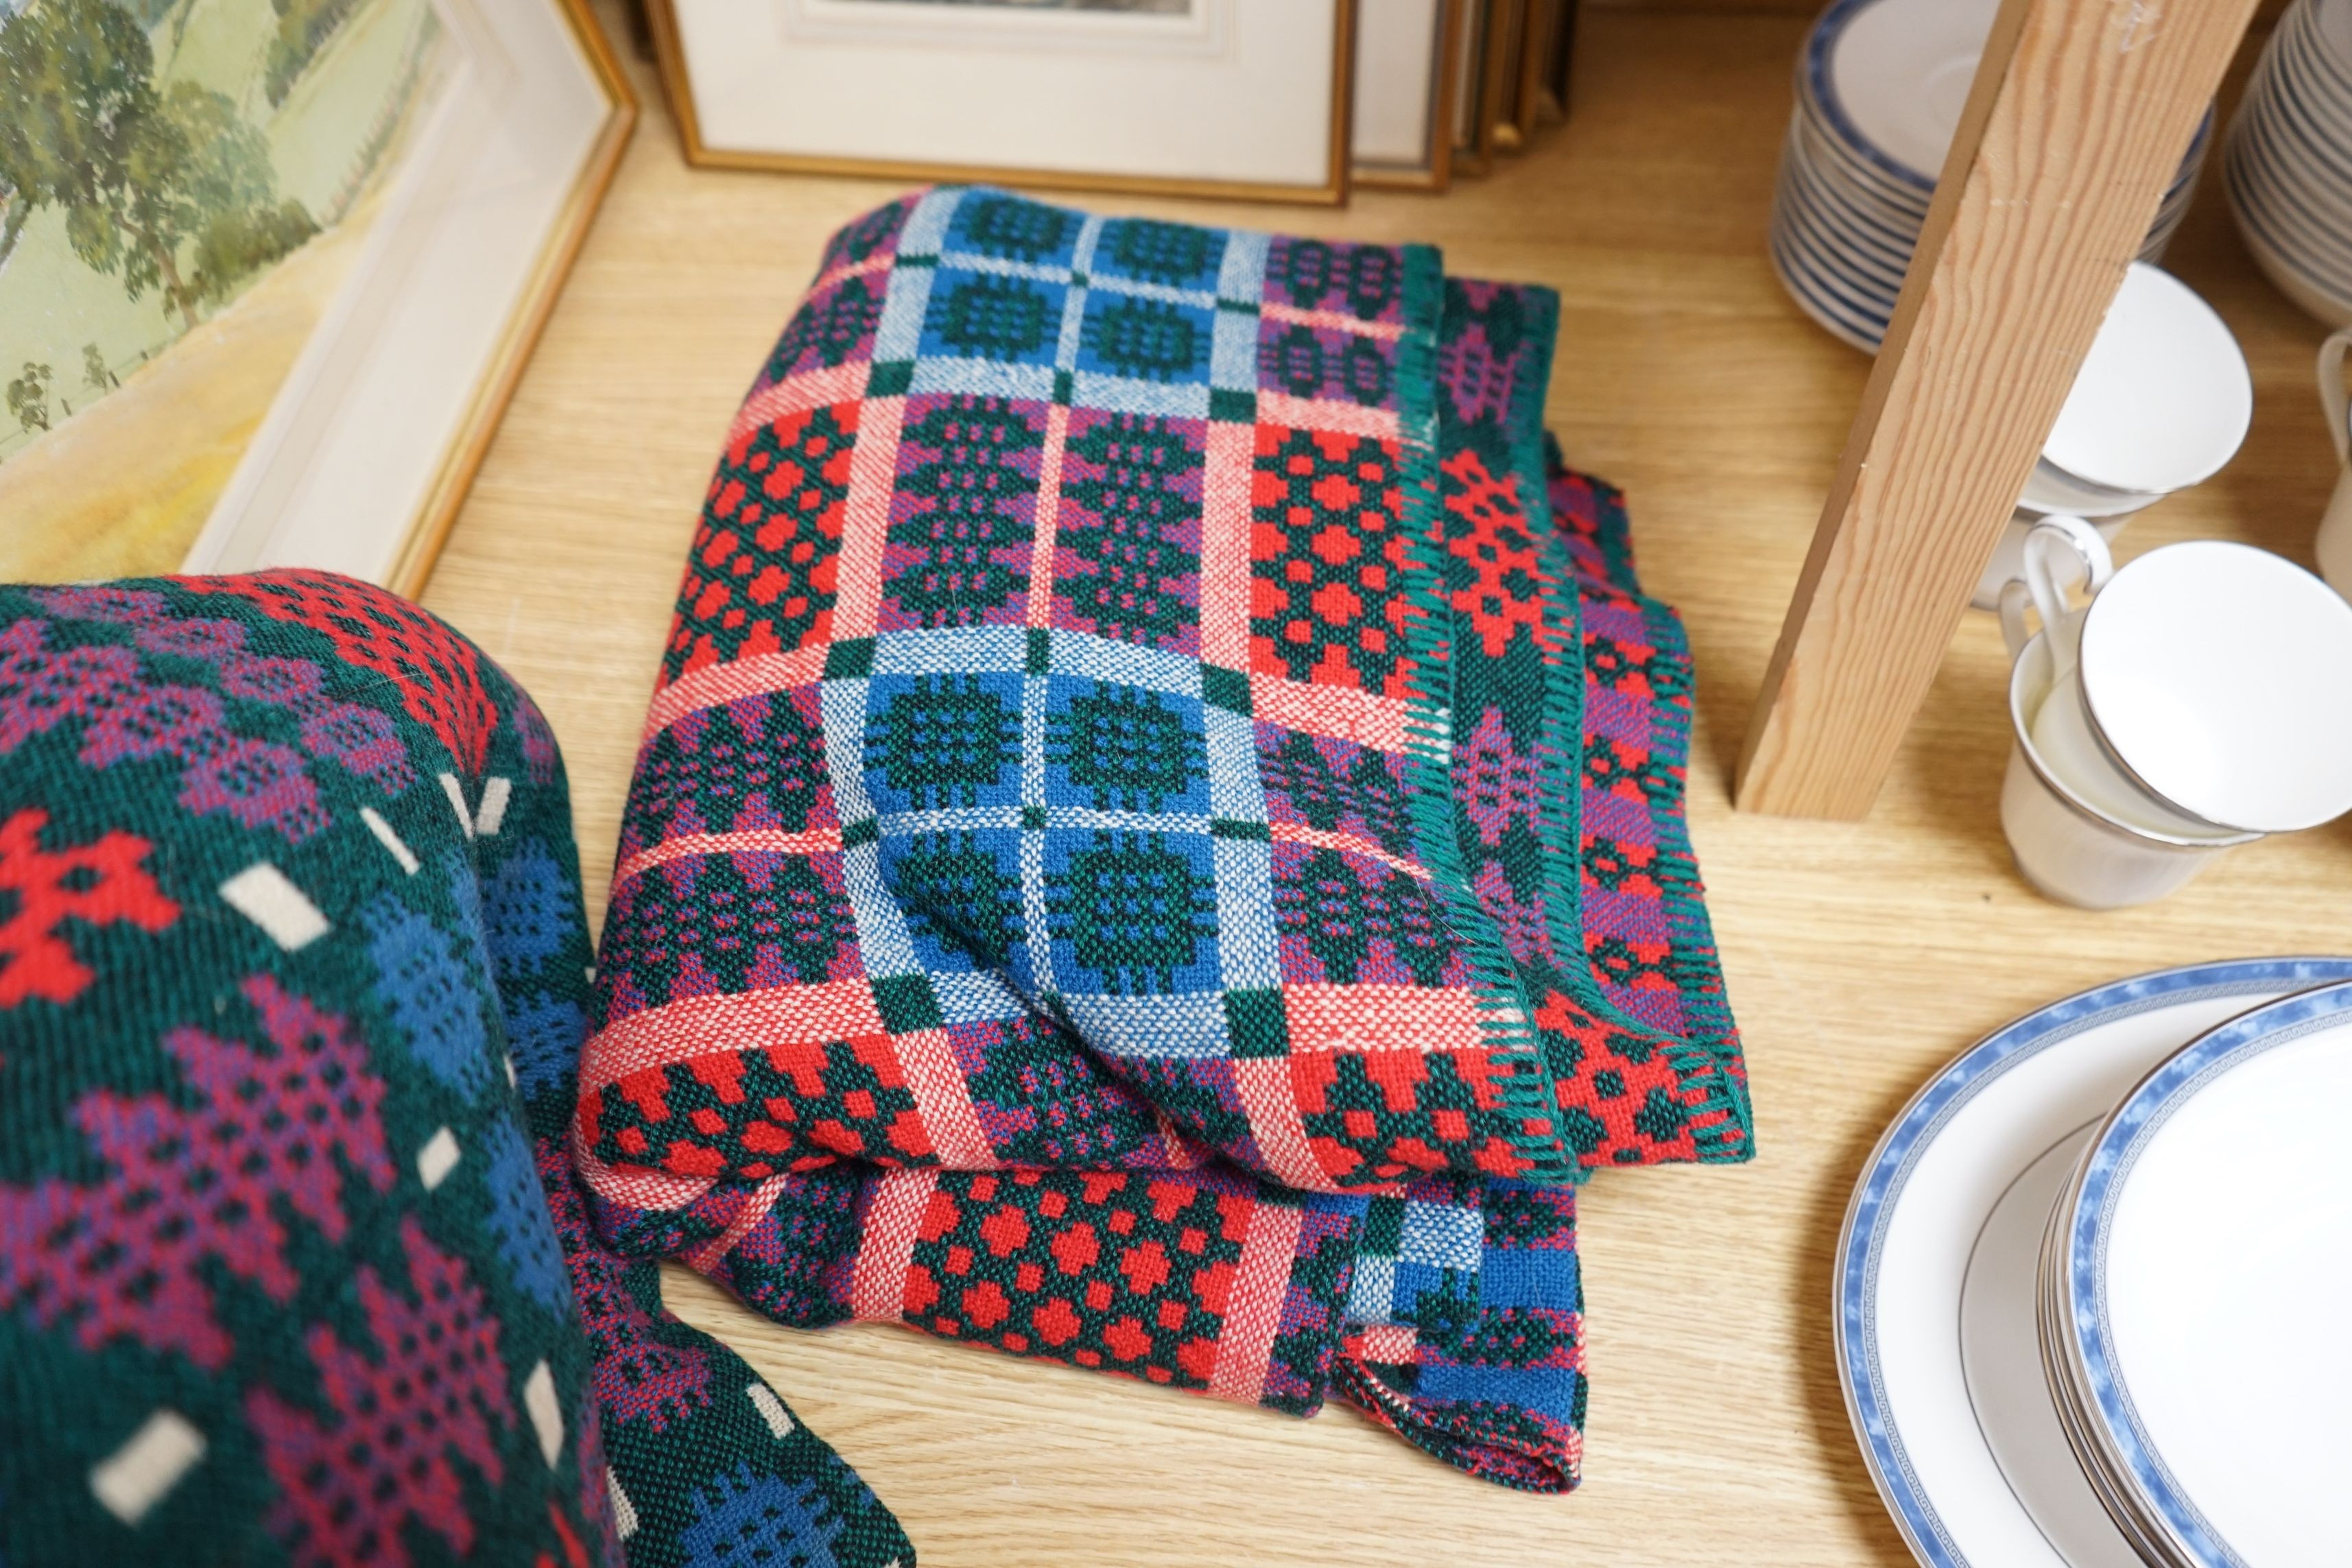 Two 20th century Welsh woven wool blankets, both with reversible weave pattern, 190cms long x 115cms wide